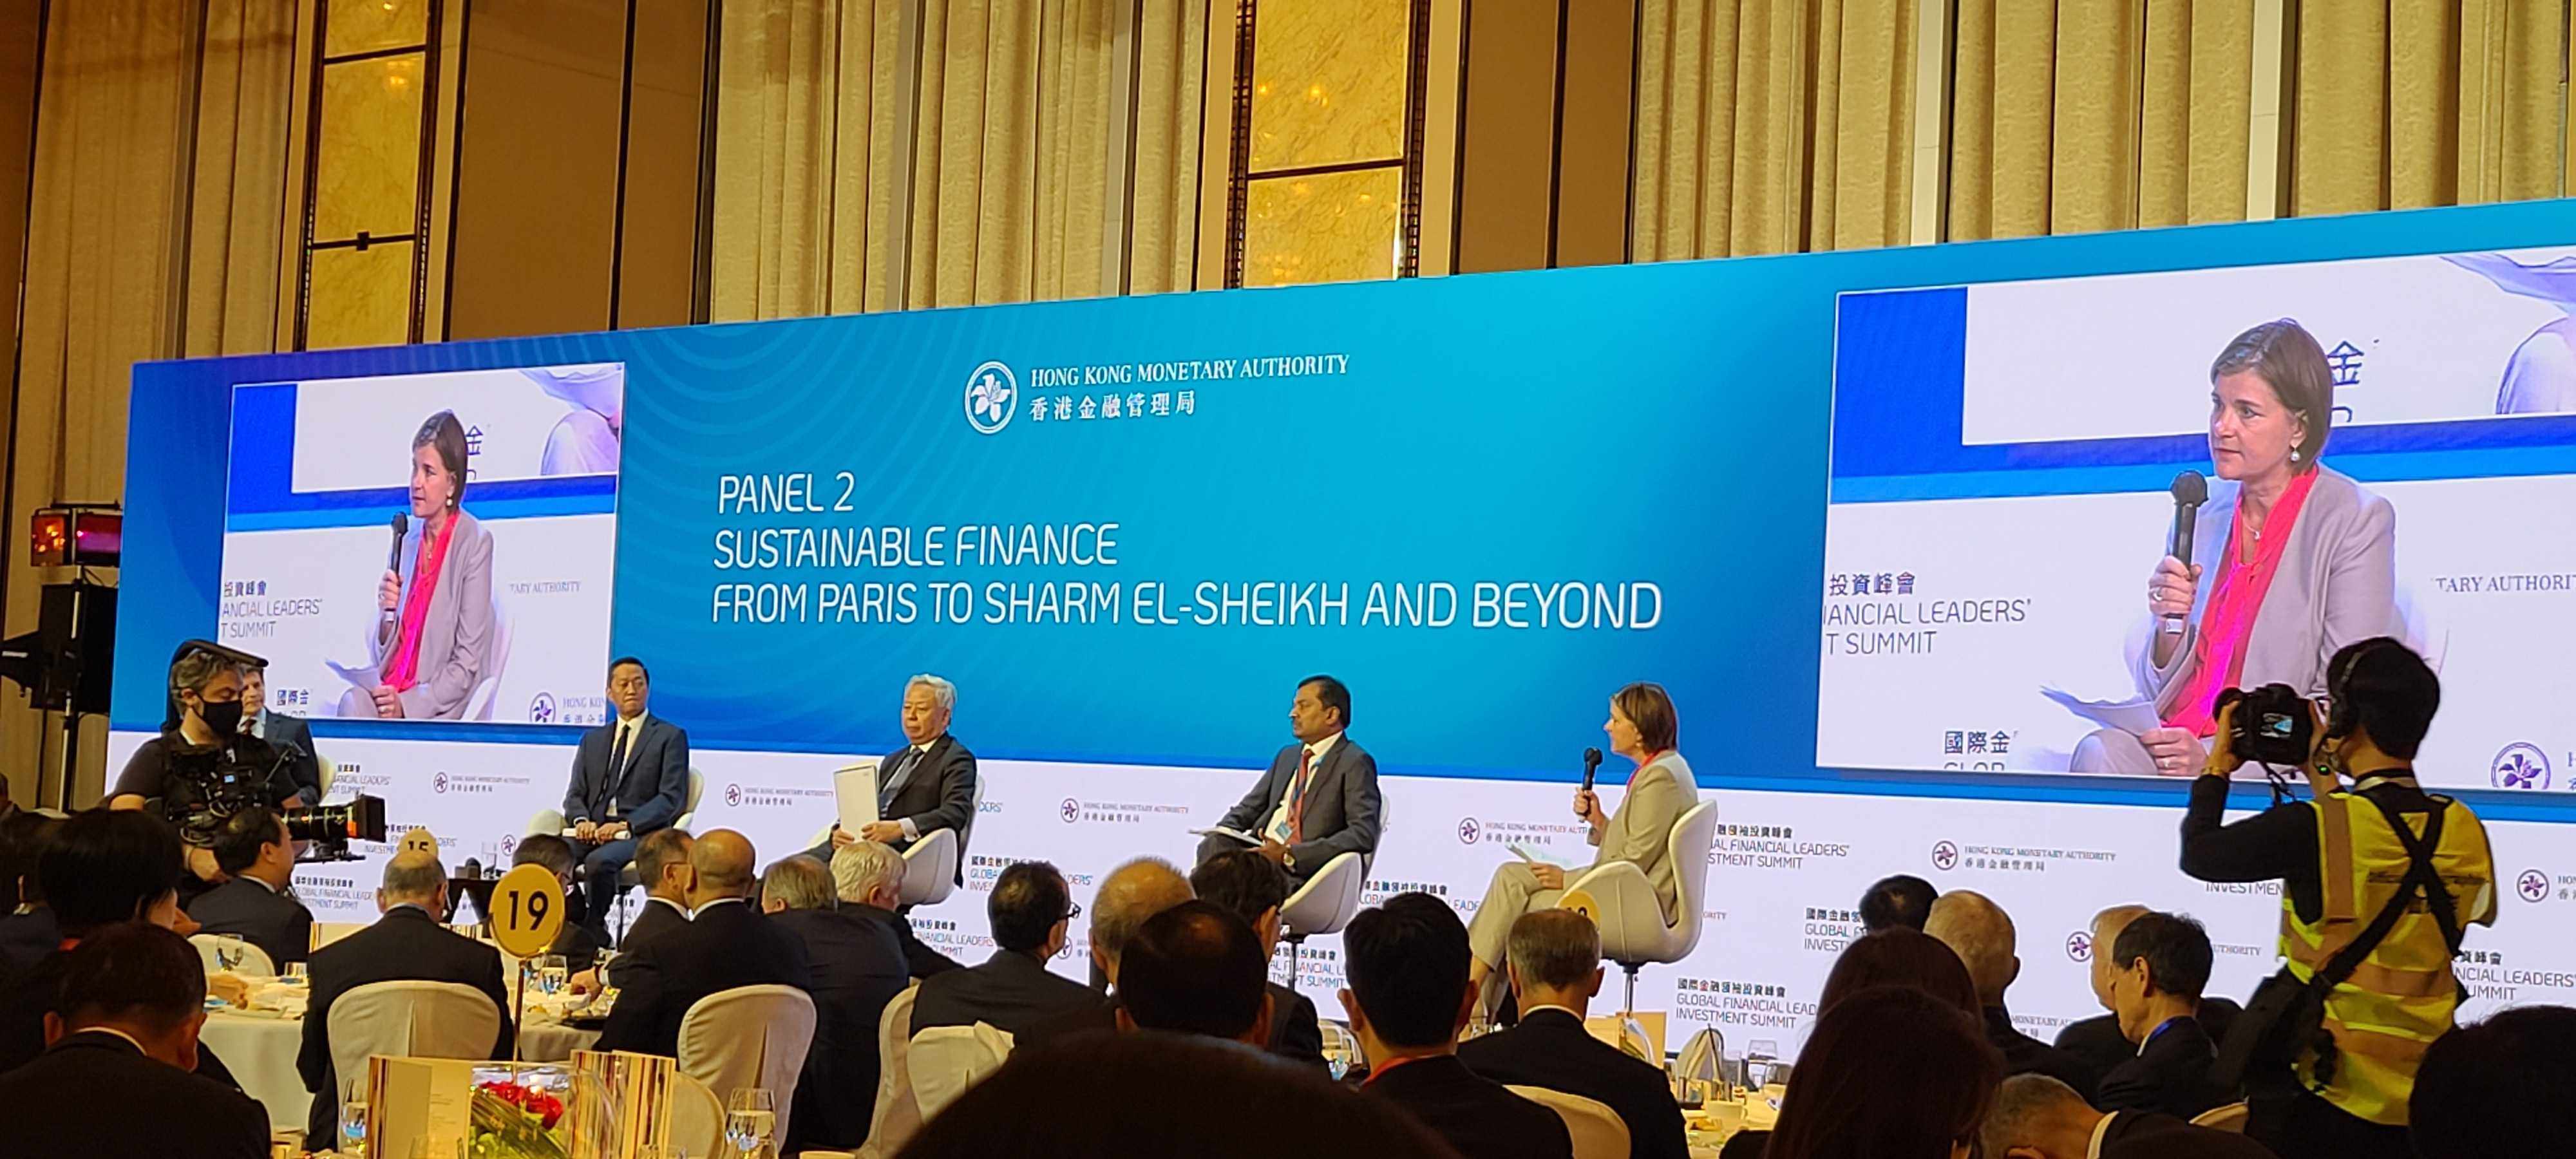 BNY Mellon Investment Management’s chief executive Hanneke Smits (first right), spoke during a panel on sustainable finance, moderated by HKEX’s chief executive Nicolas Aguzin (extreme left) at the Global Financial Leaders’ Investment Summit at the Four Seasons Hotel on 2 November 2022. Photo: Enoch Yiu. 